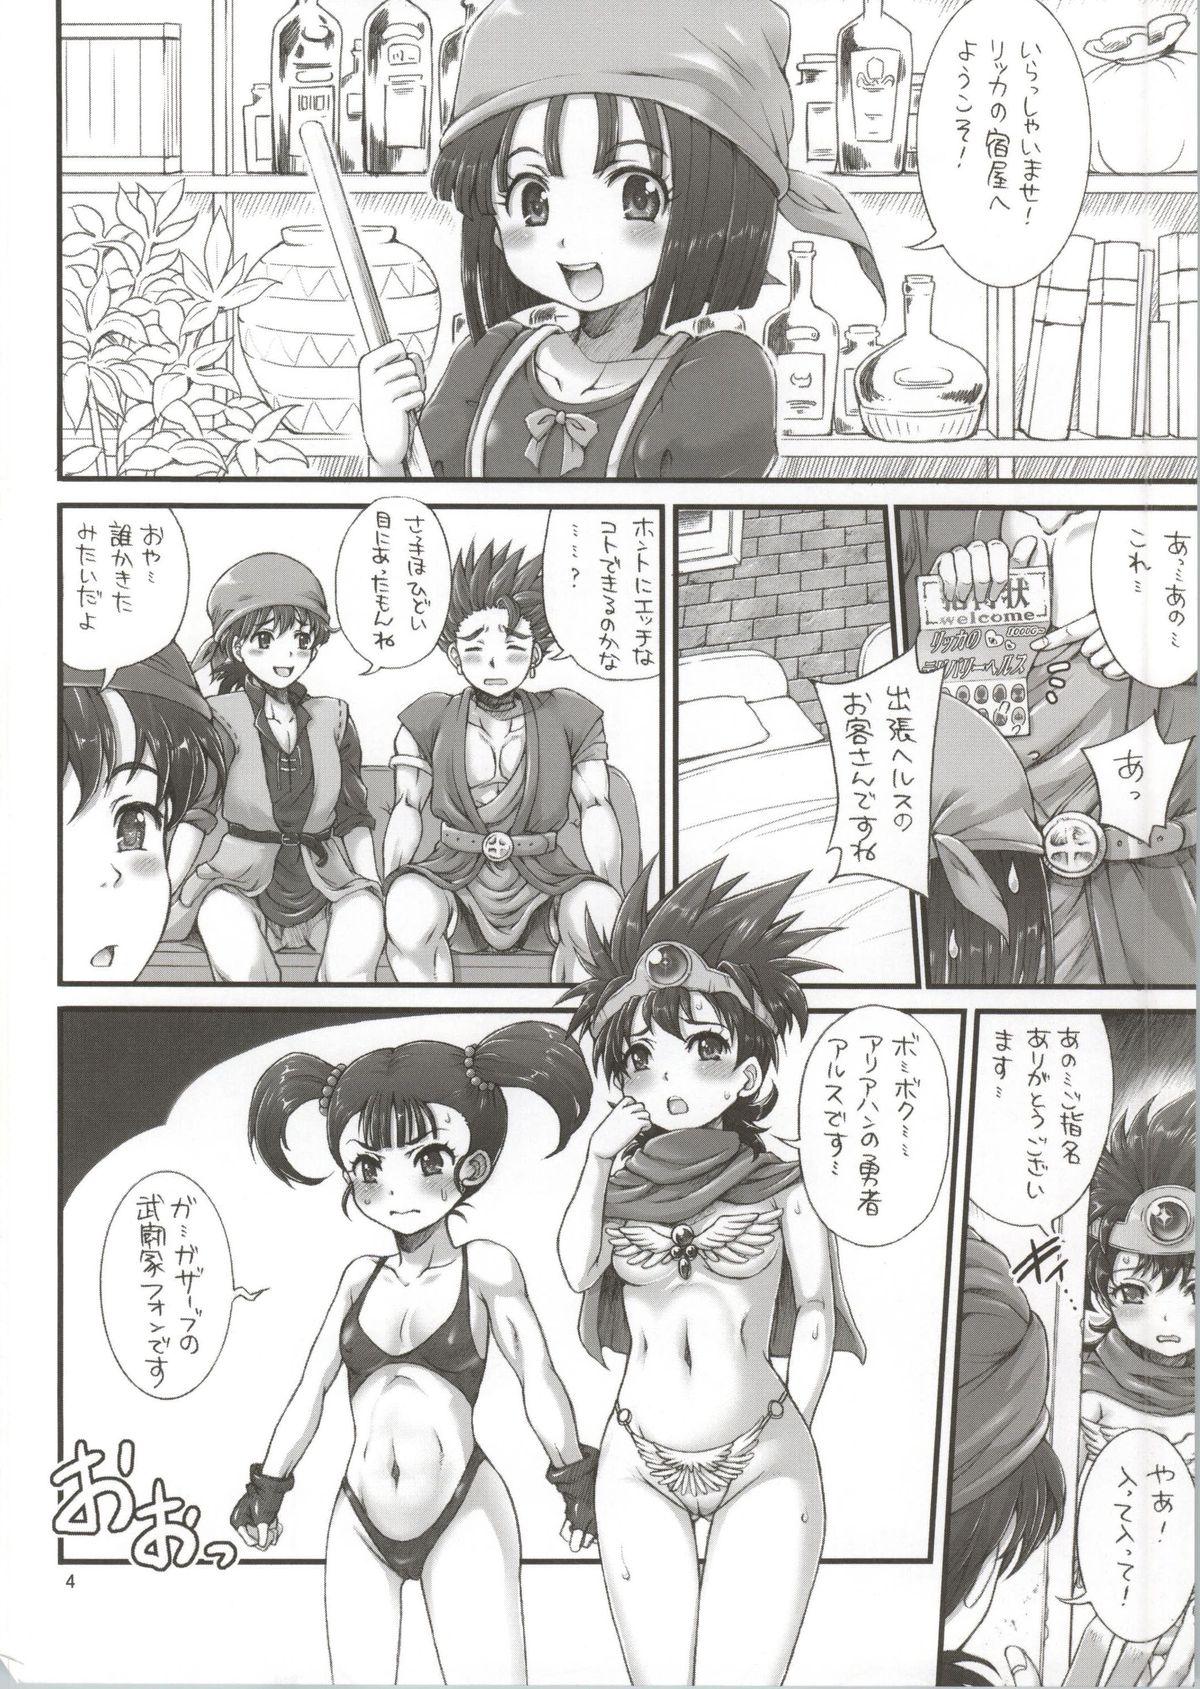 Cruising DQ Delivery Health All Stars - Dragon quest Strip - Page 3